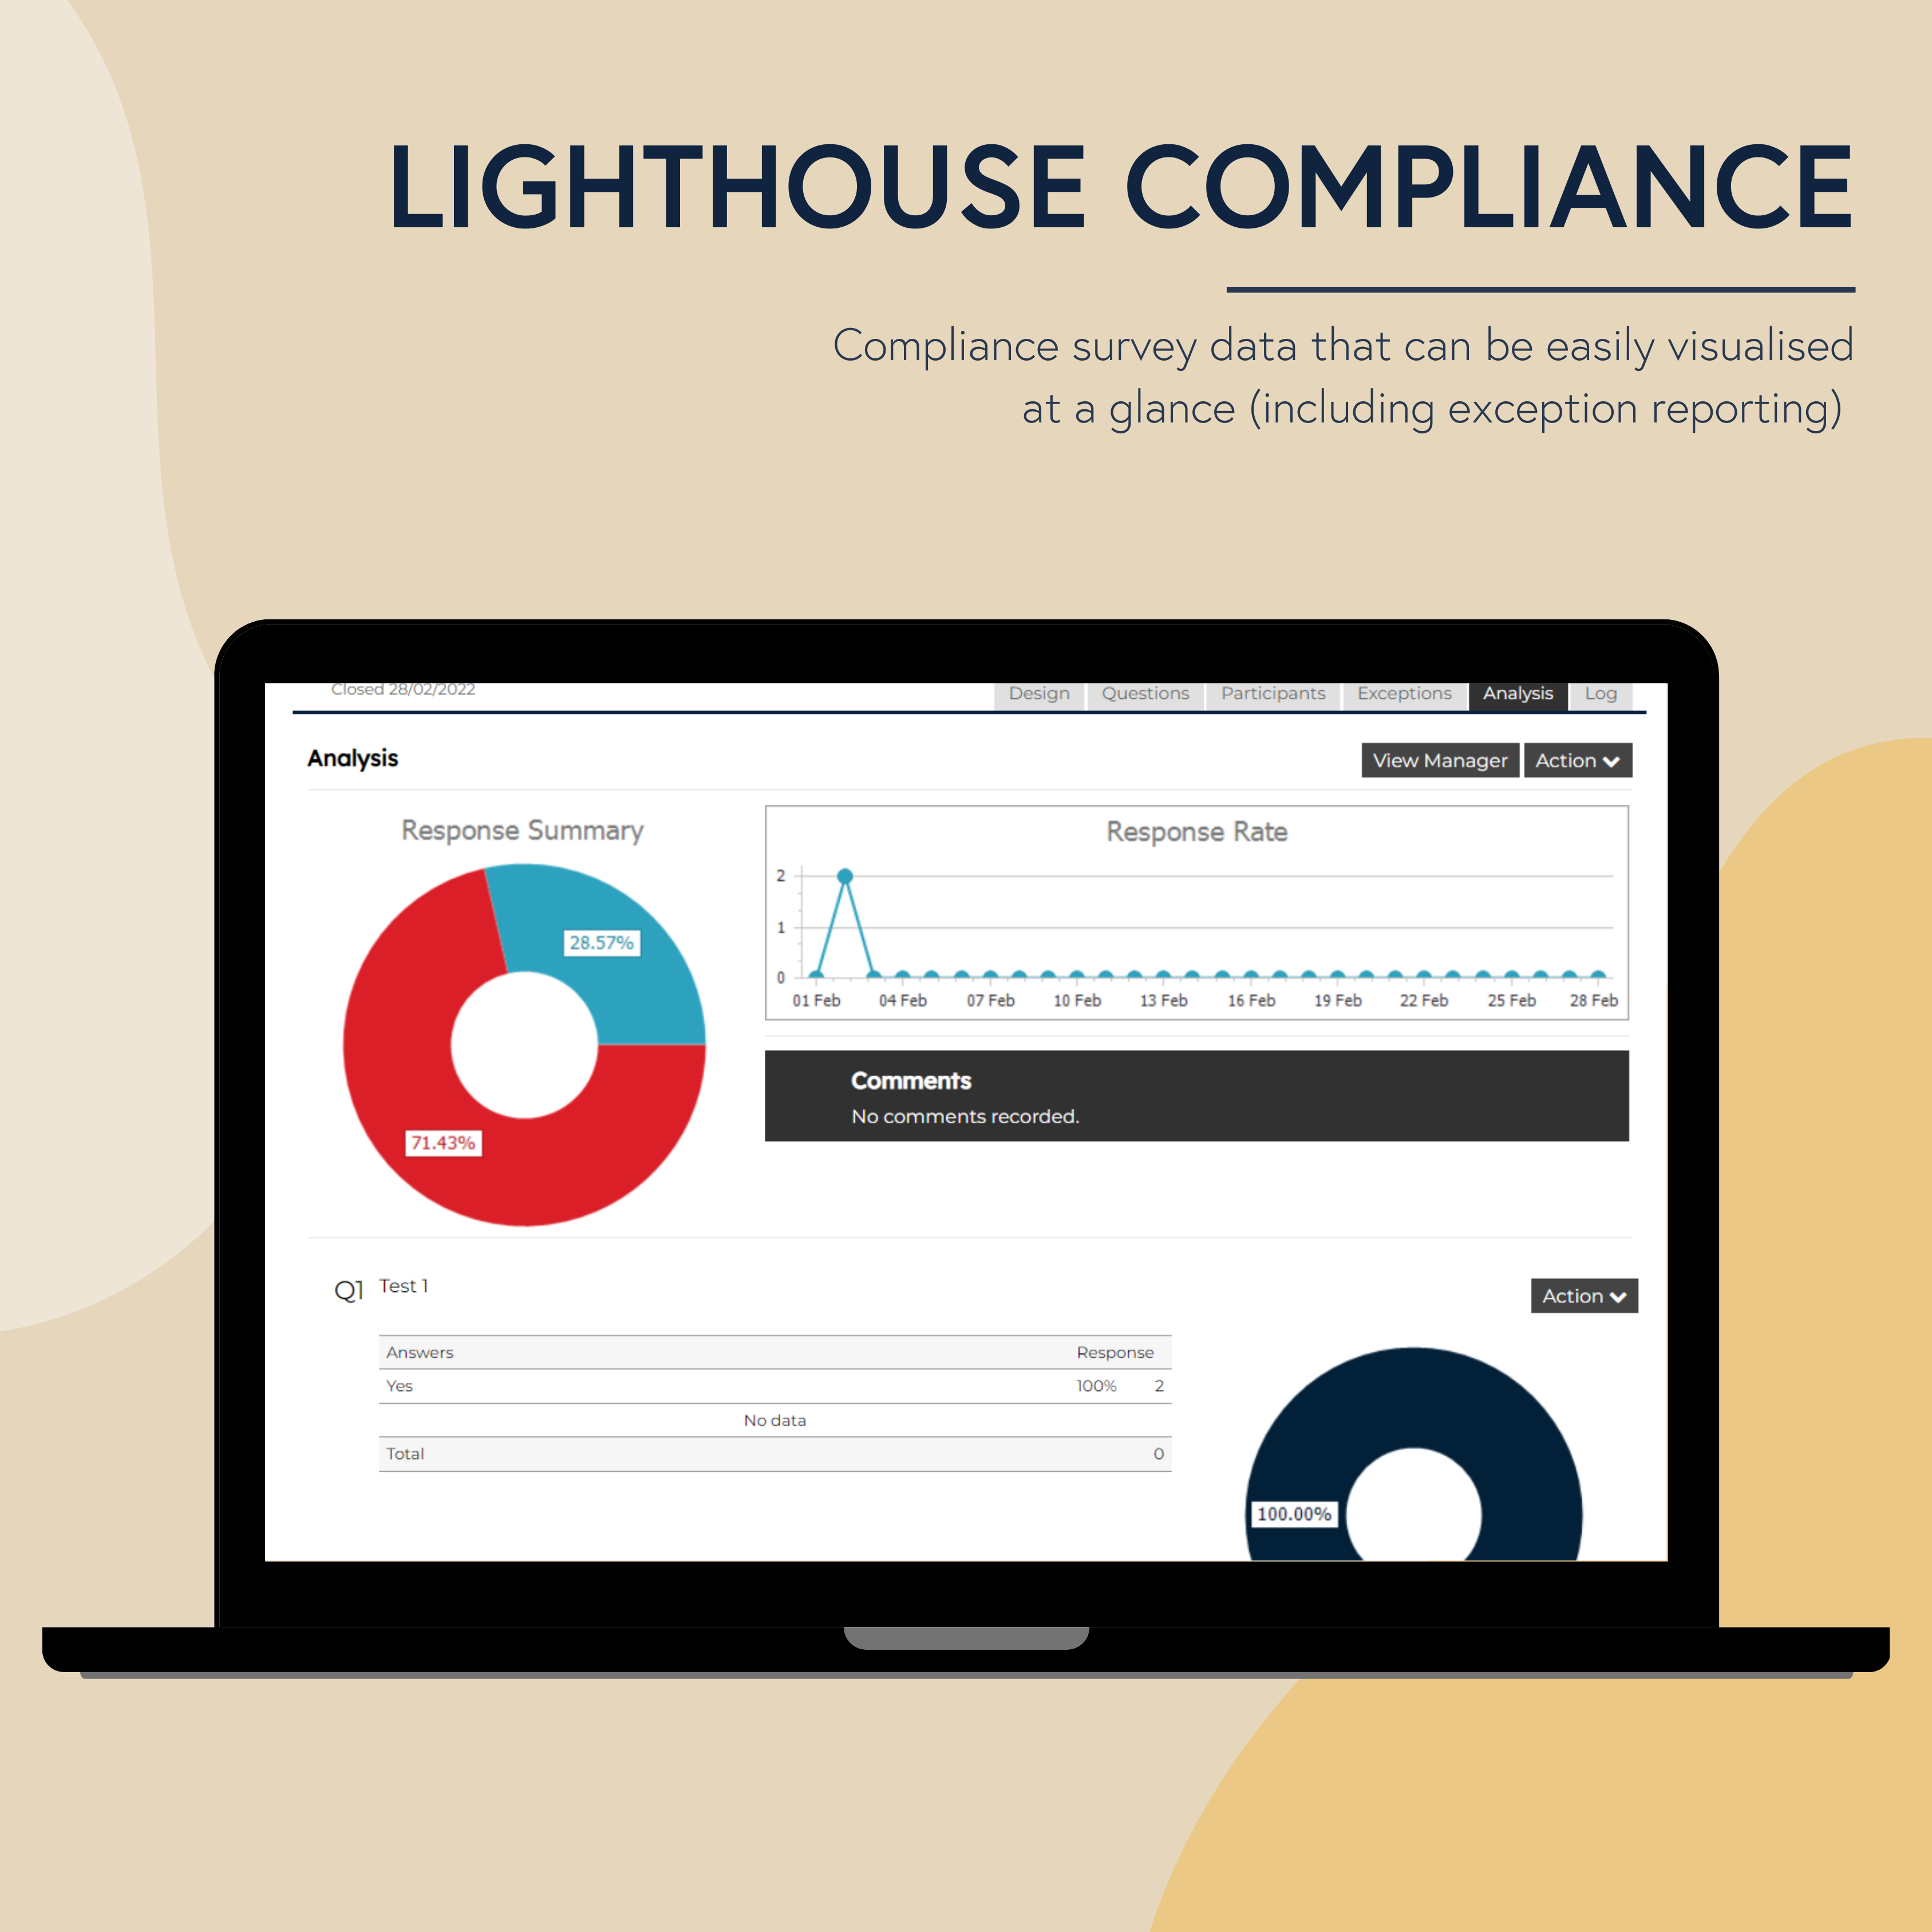 Compliance survey data that can be easily visualised at a glance (including exception reporting)